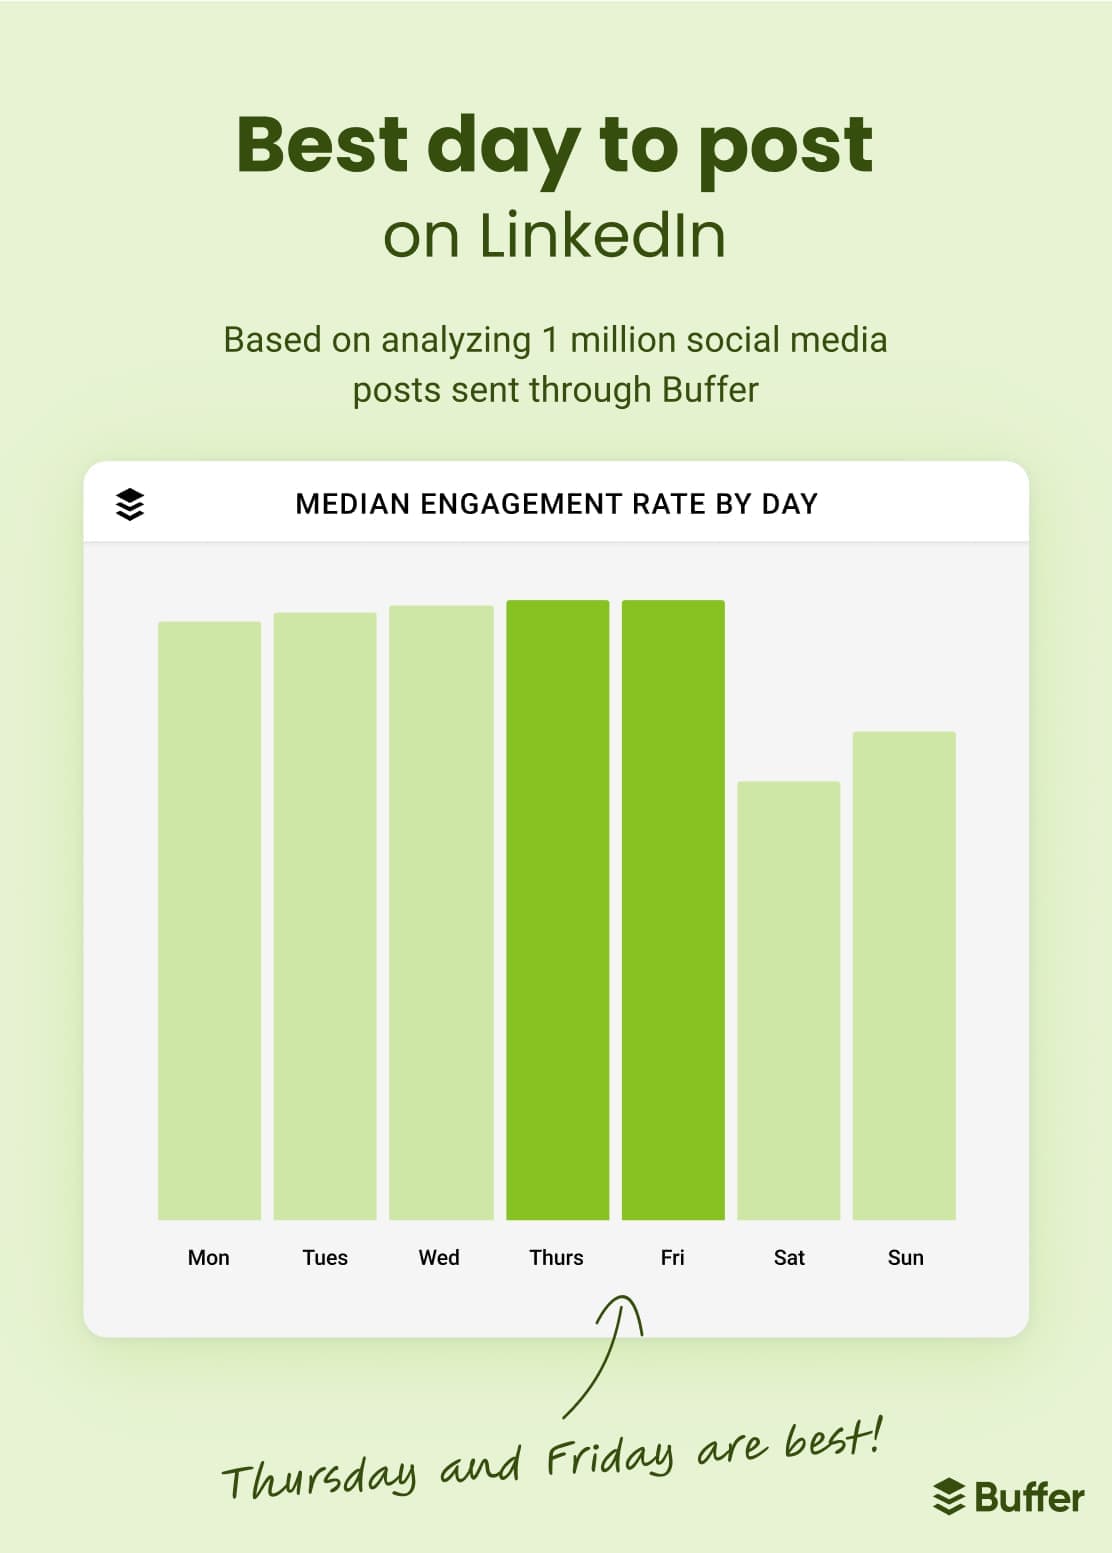 Bar chart of the best day to post on LinkedIn based on analyzing 1 million social media posts sent through Buffer displaying Thursday and Friday as the best days to post, followed by Wednesday, Tuesday, Monday, Sunday, and lastly Saturday.